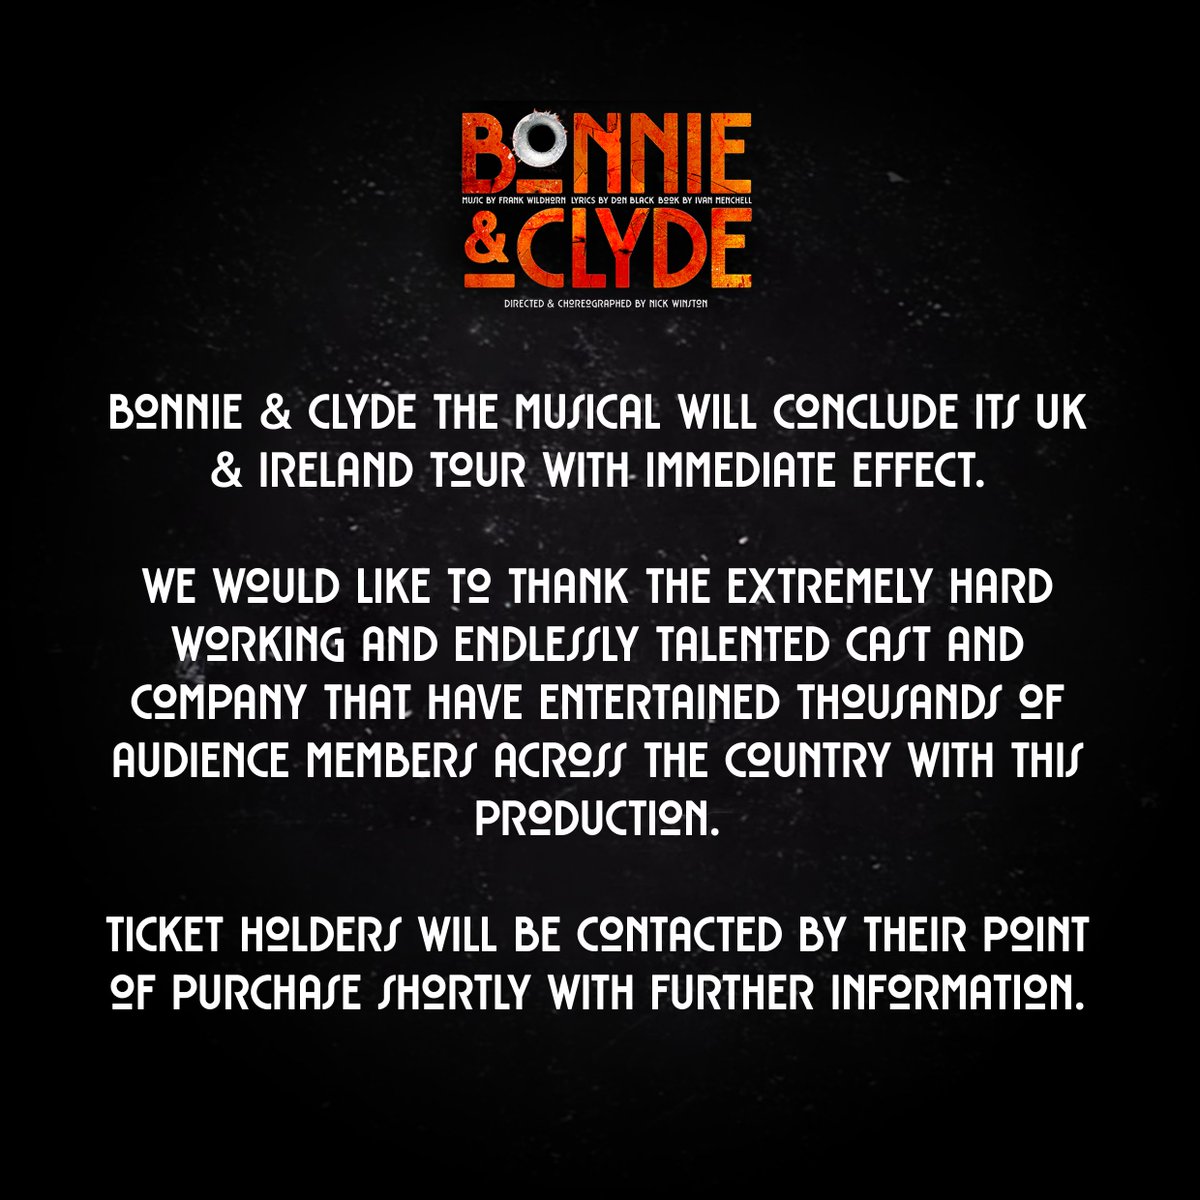 Bonnie & Clyde The Musical will conclude its UK & Ireland tour with immediate effect. We would like to thank the extremely hard working and endlessly talented cast and company that have entertained thousands of audience members across the country with this production.